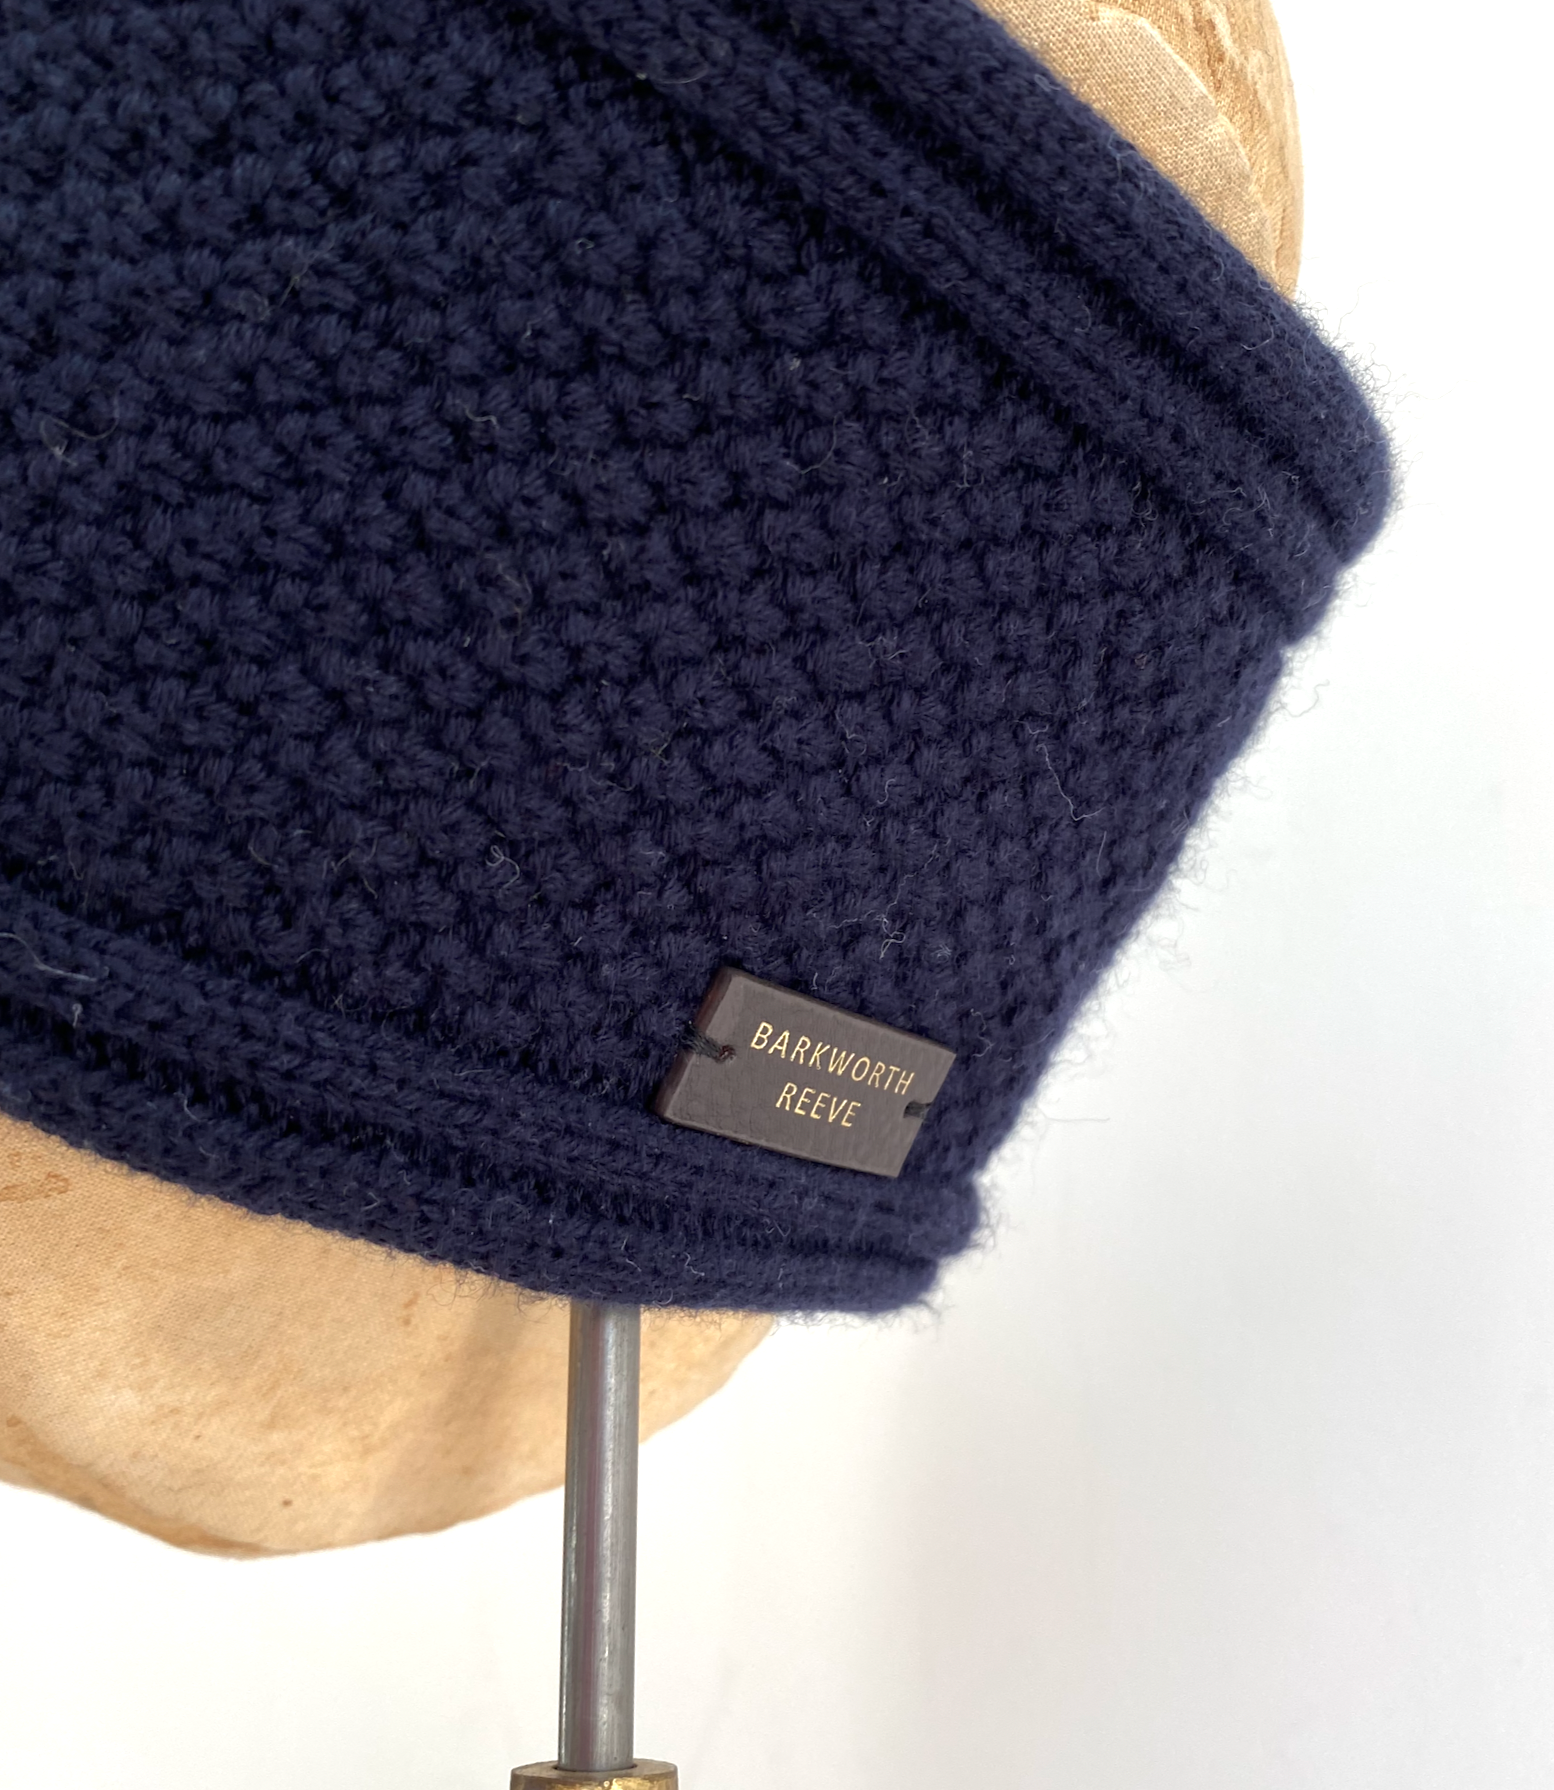 Knitted Navy Headband in Cashmere Mix Yarn